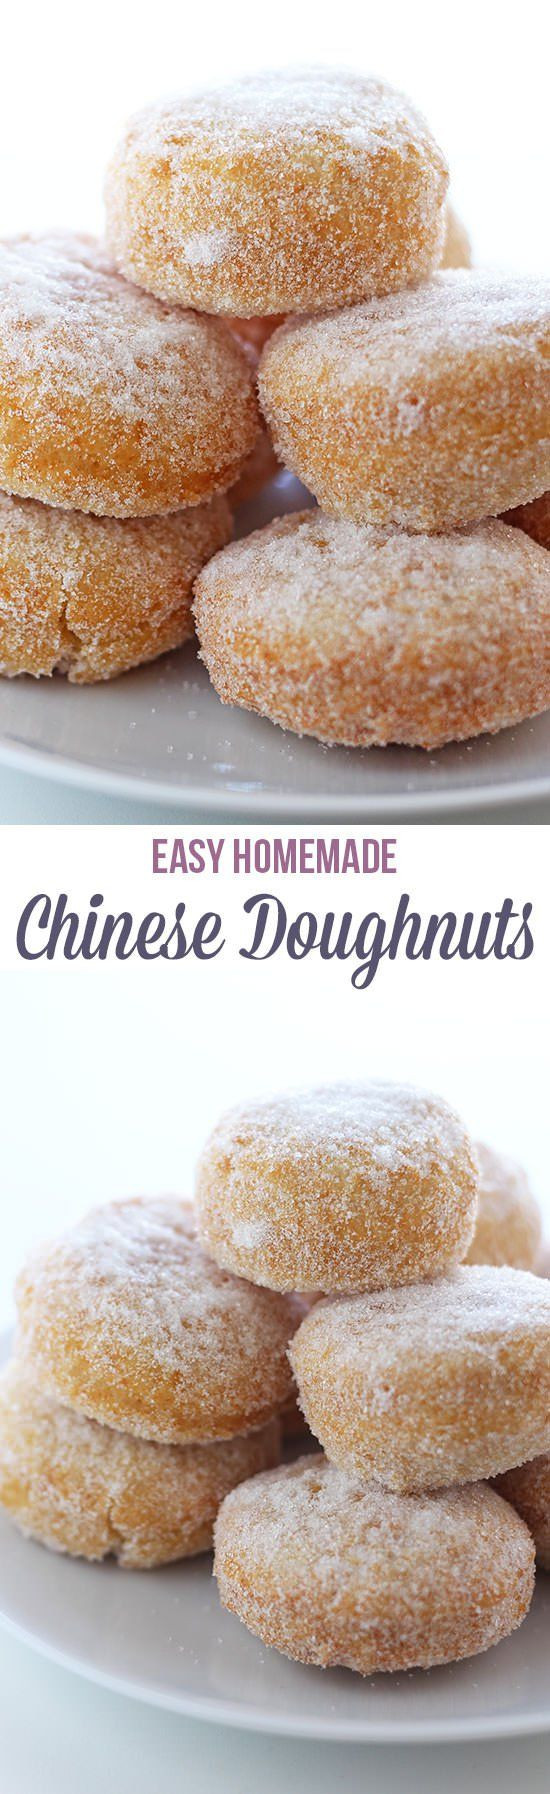 Easy Chinese Dessert Recipes
 Easy Recipes on